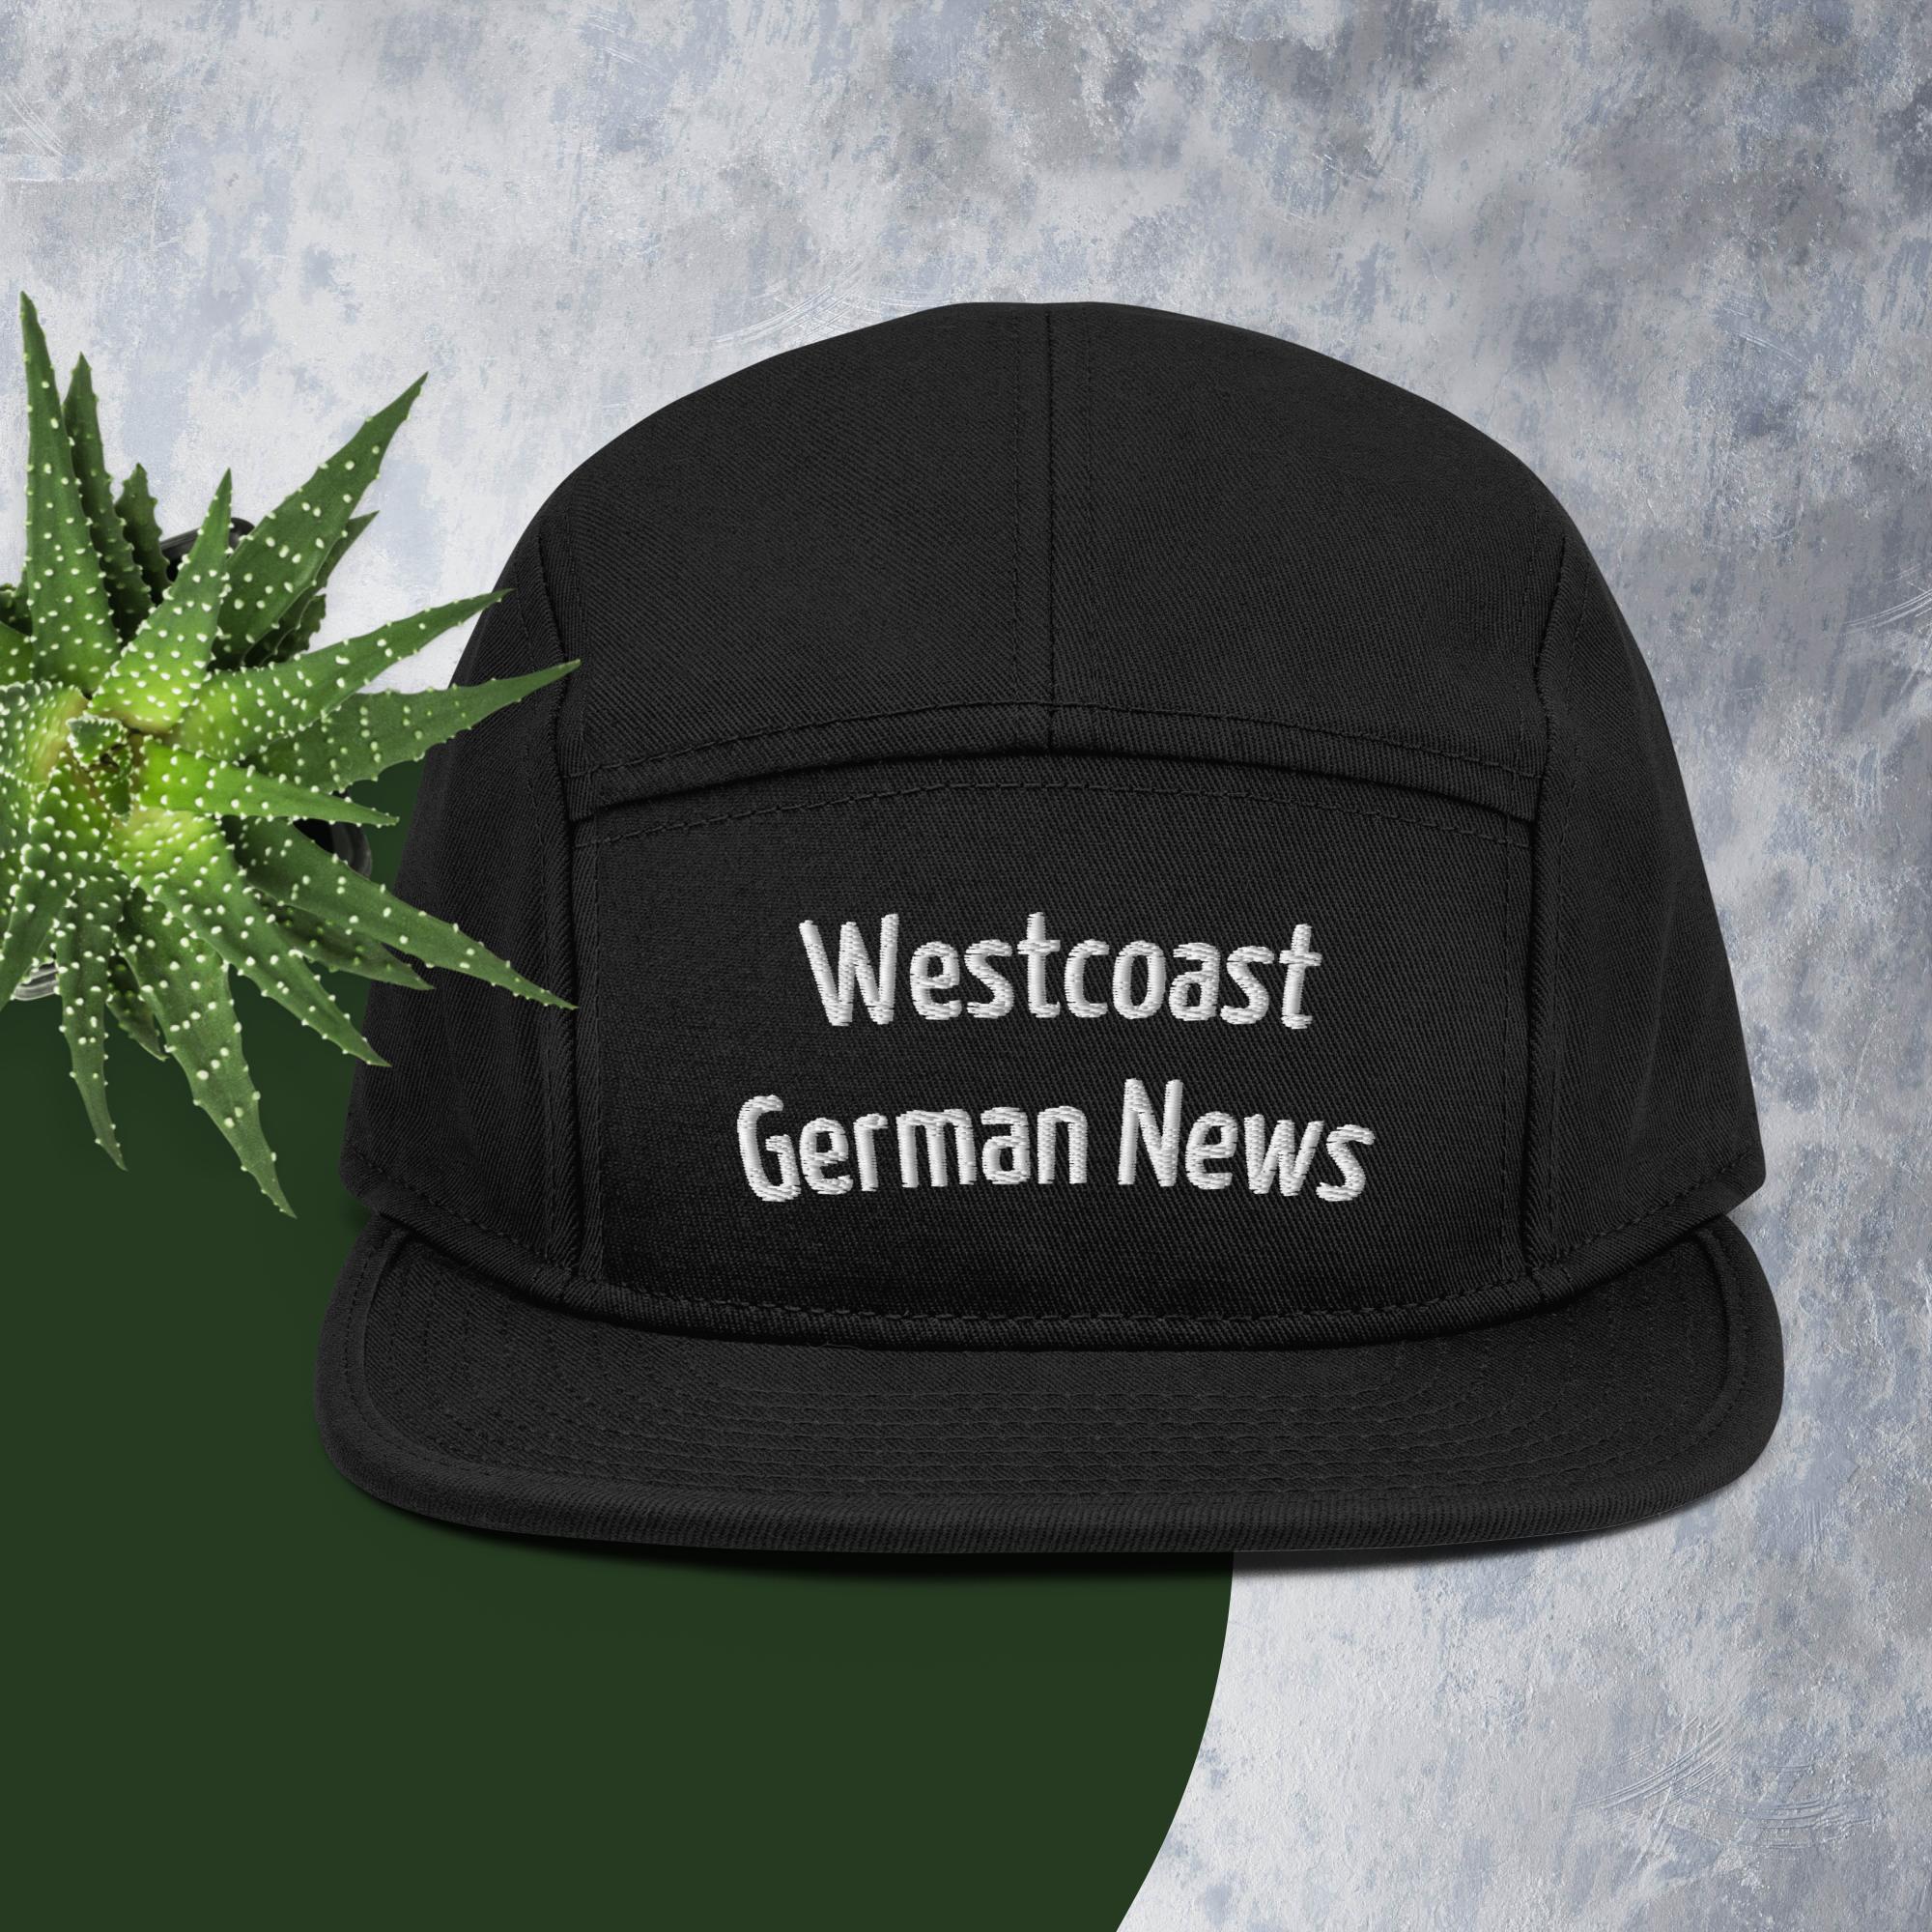 Black hat with white letters "Westcoast German News"